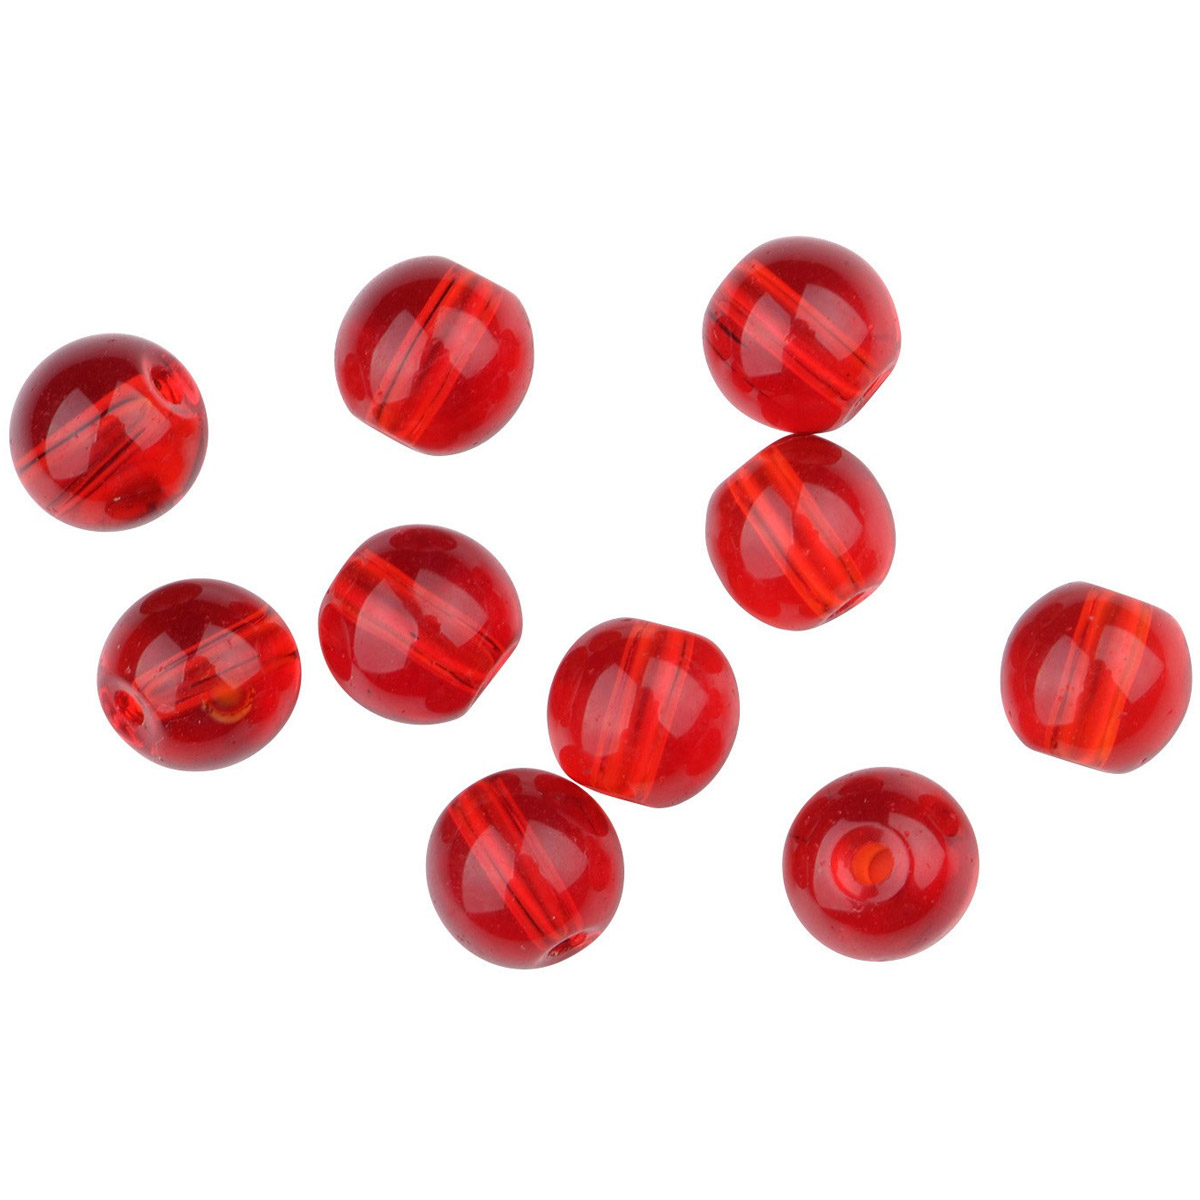 Spro Round Smooth Glass Beads Red Ruby -  8.0 mm -  6.0 mm -  4.0 mm